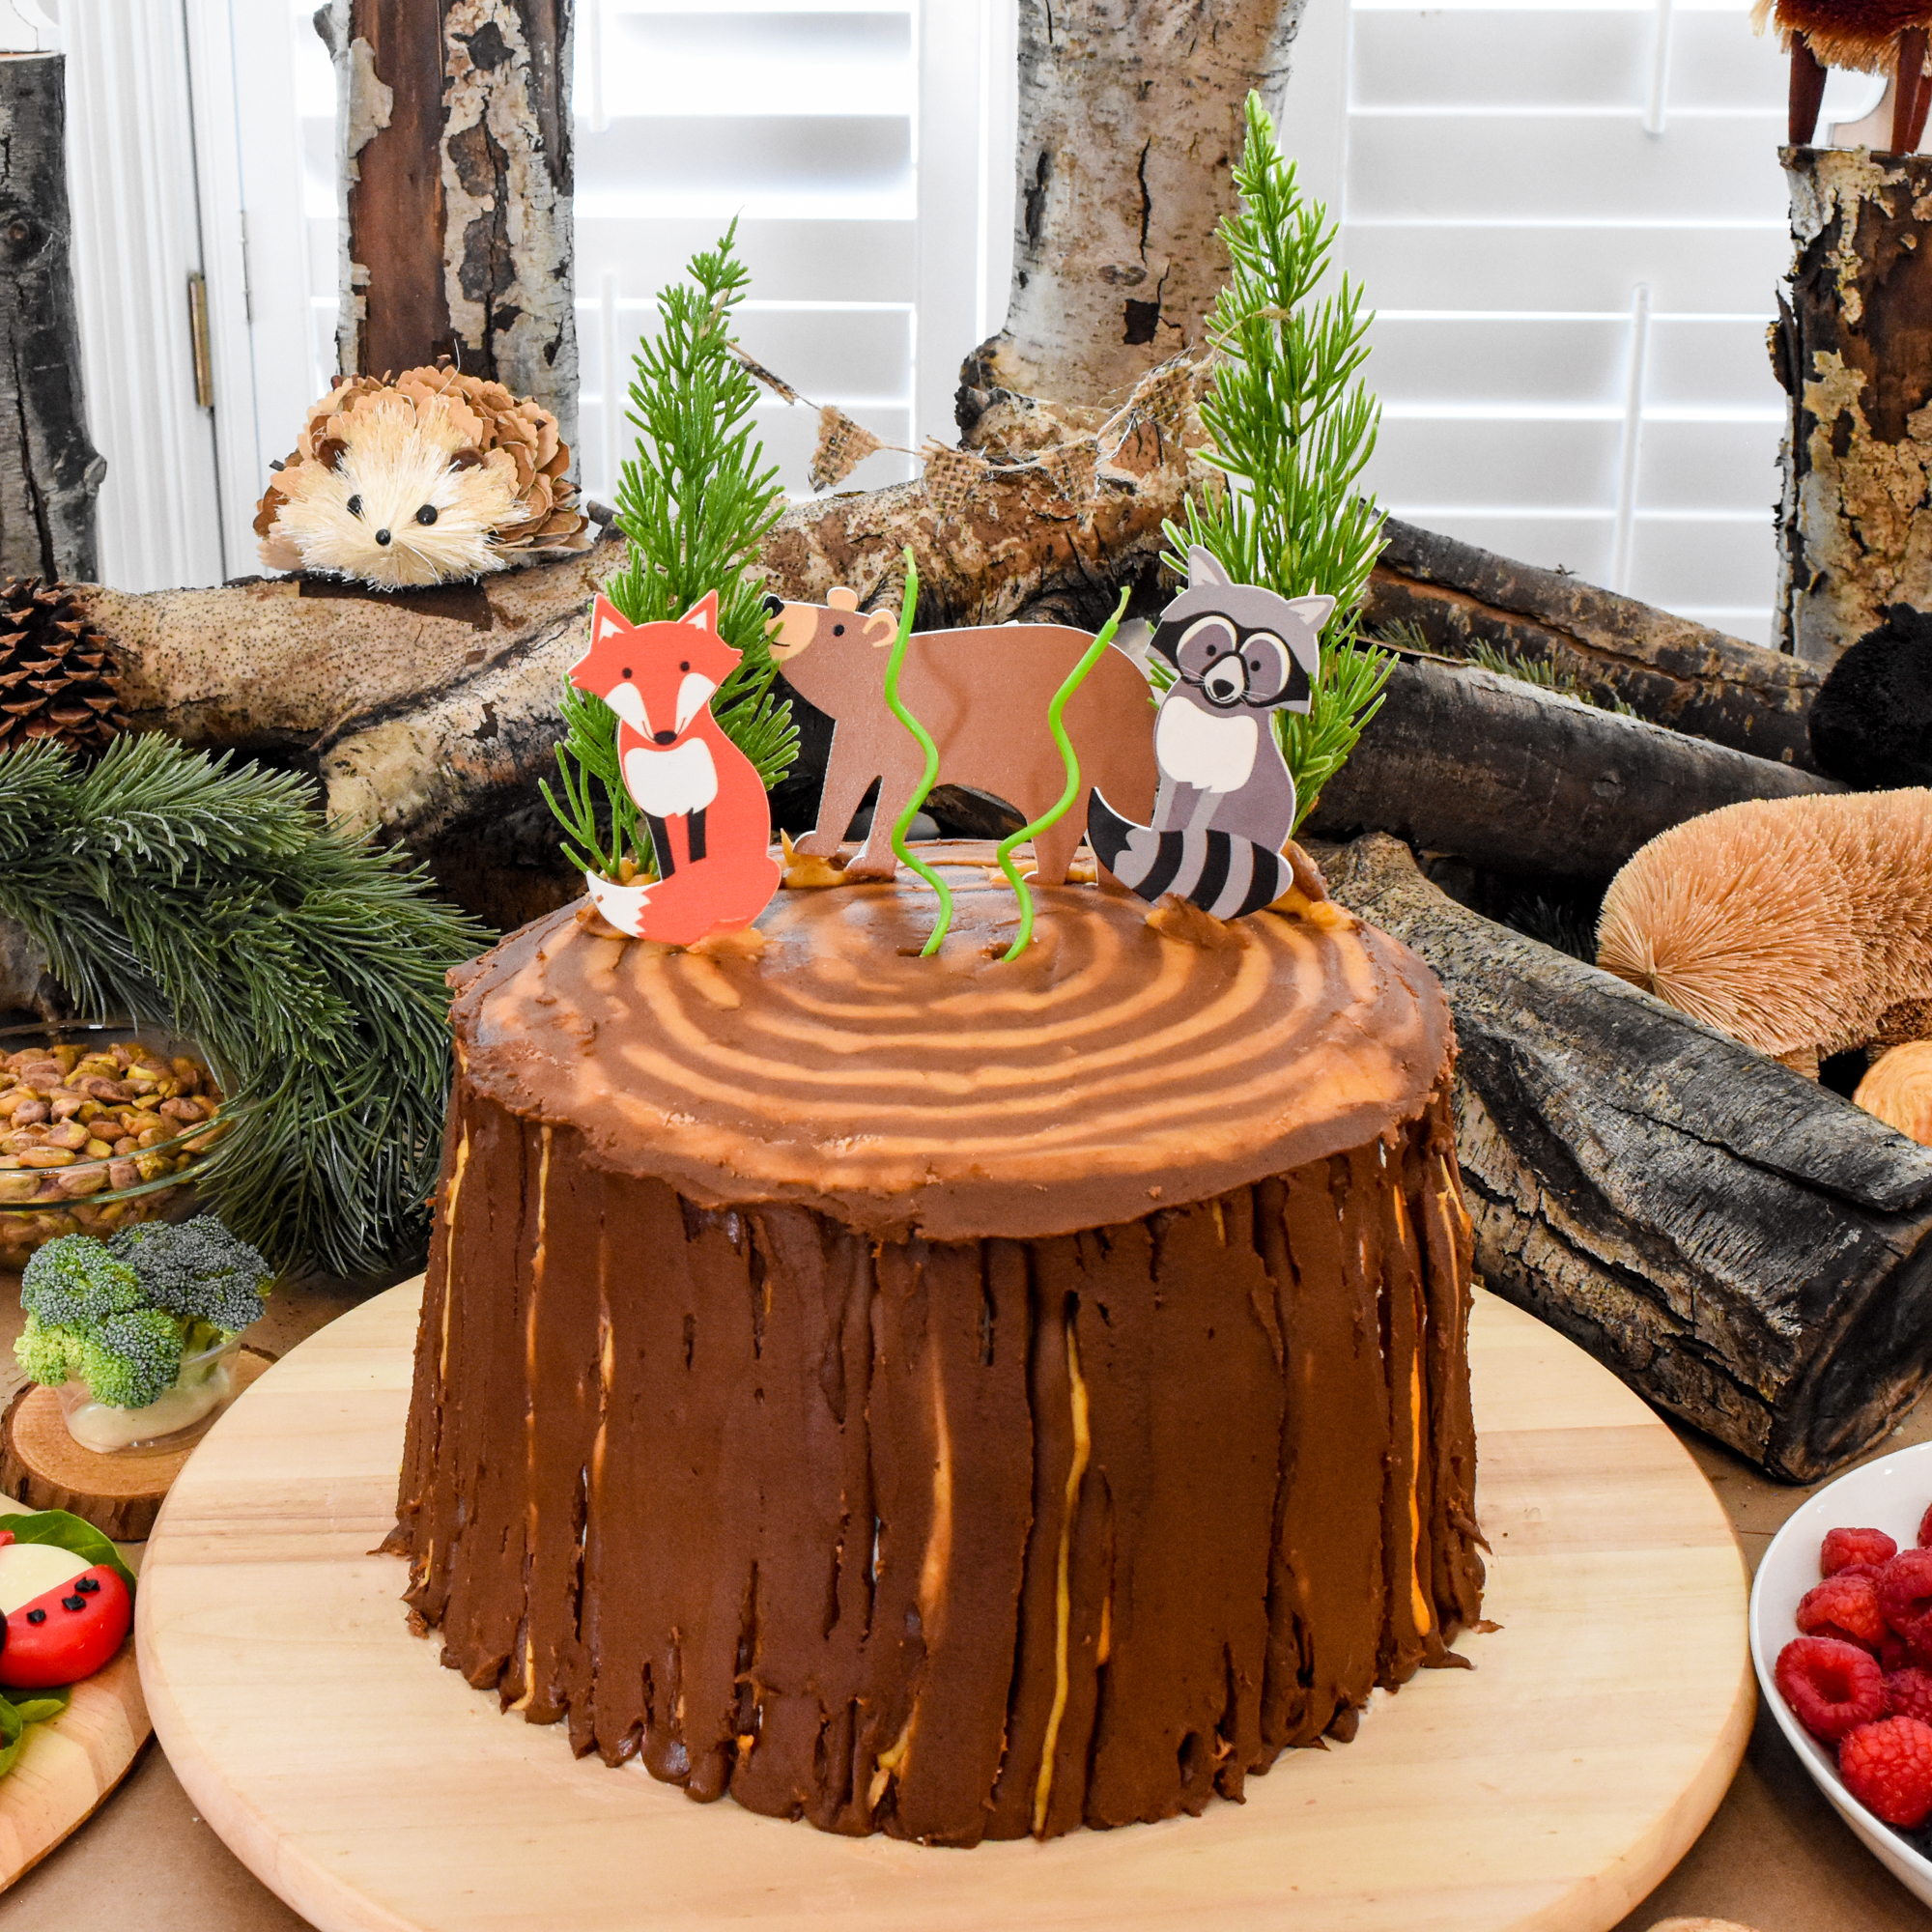 Tree Stump Cake for a Woodland Birthday Party